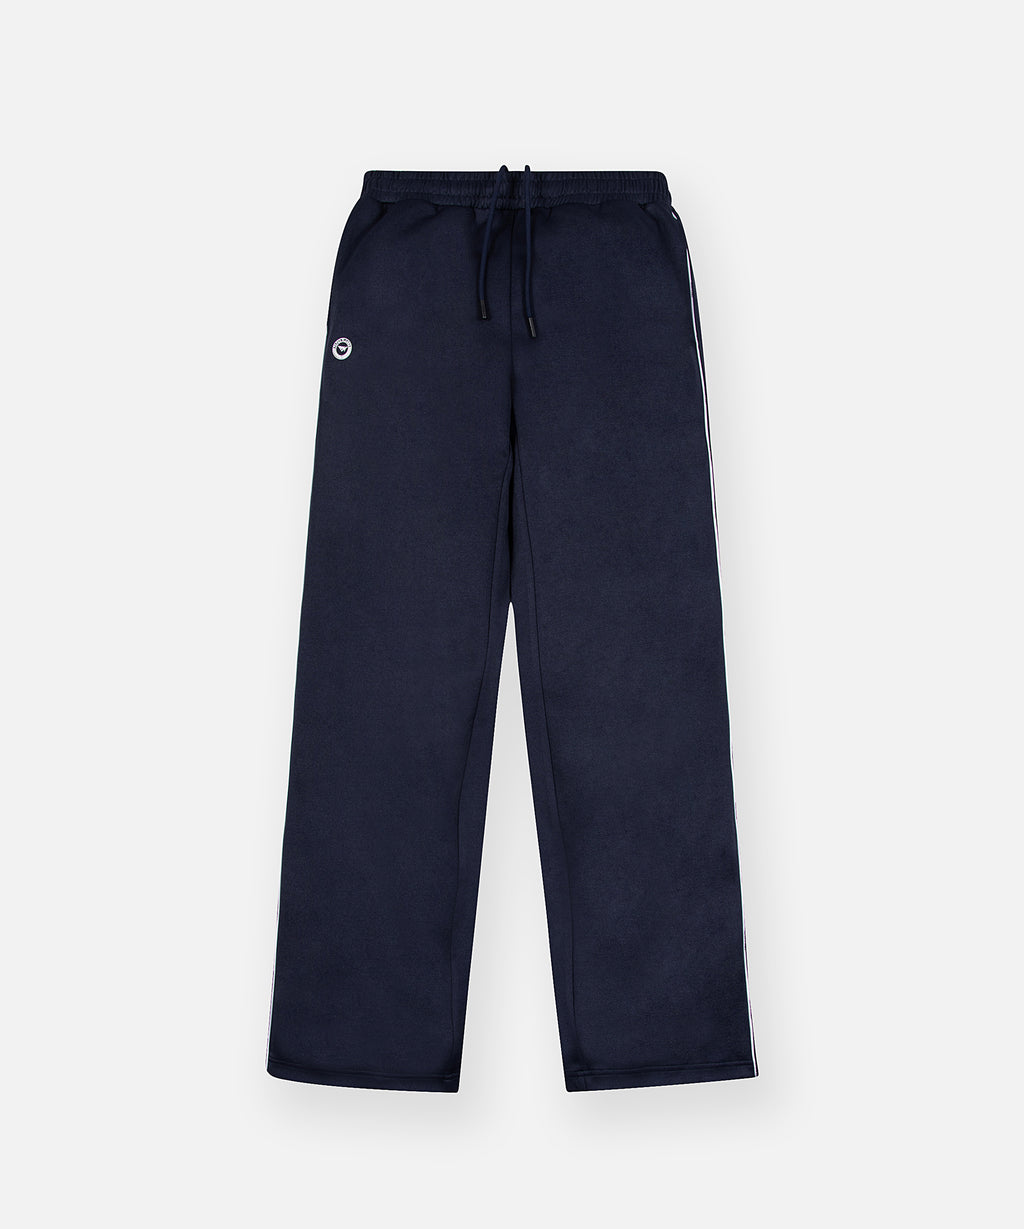 Paper Planes - OFF-COURT TEAR AWAY PANT - Navy